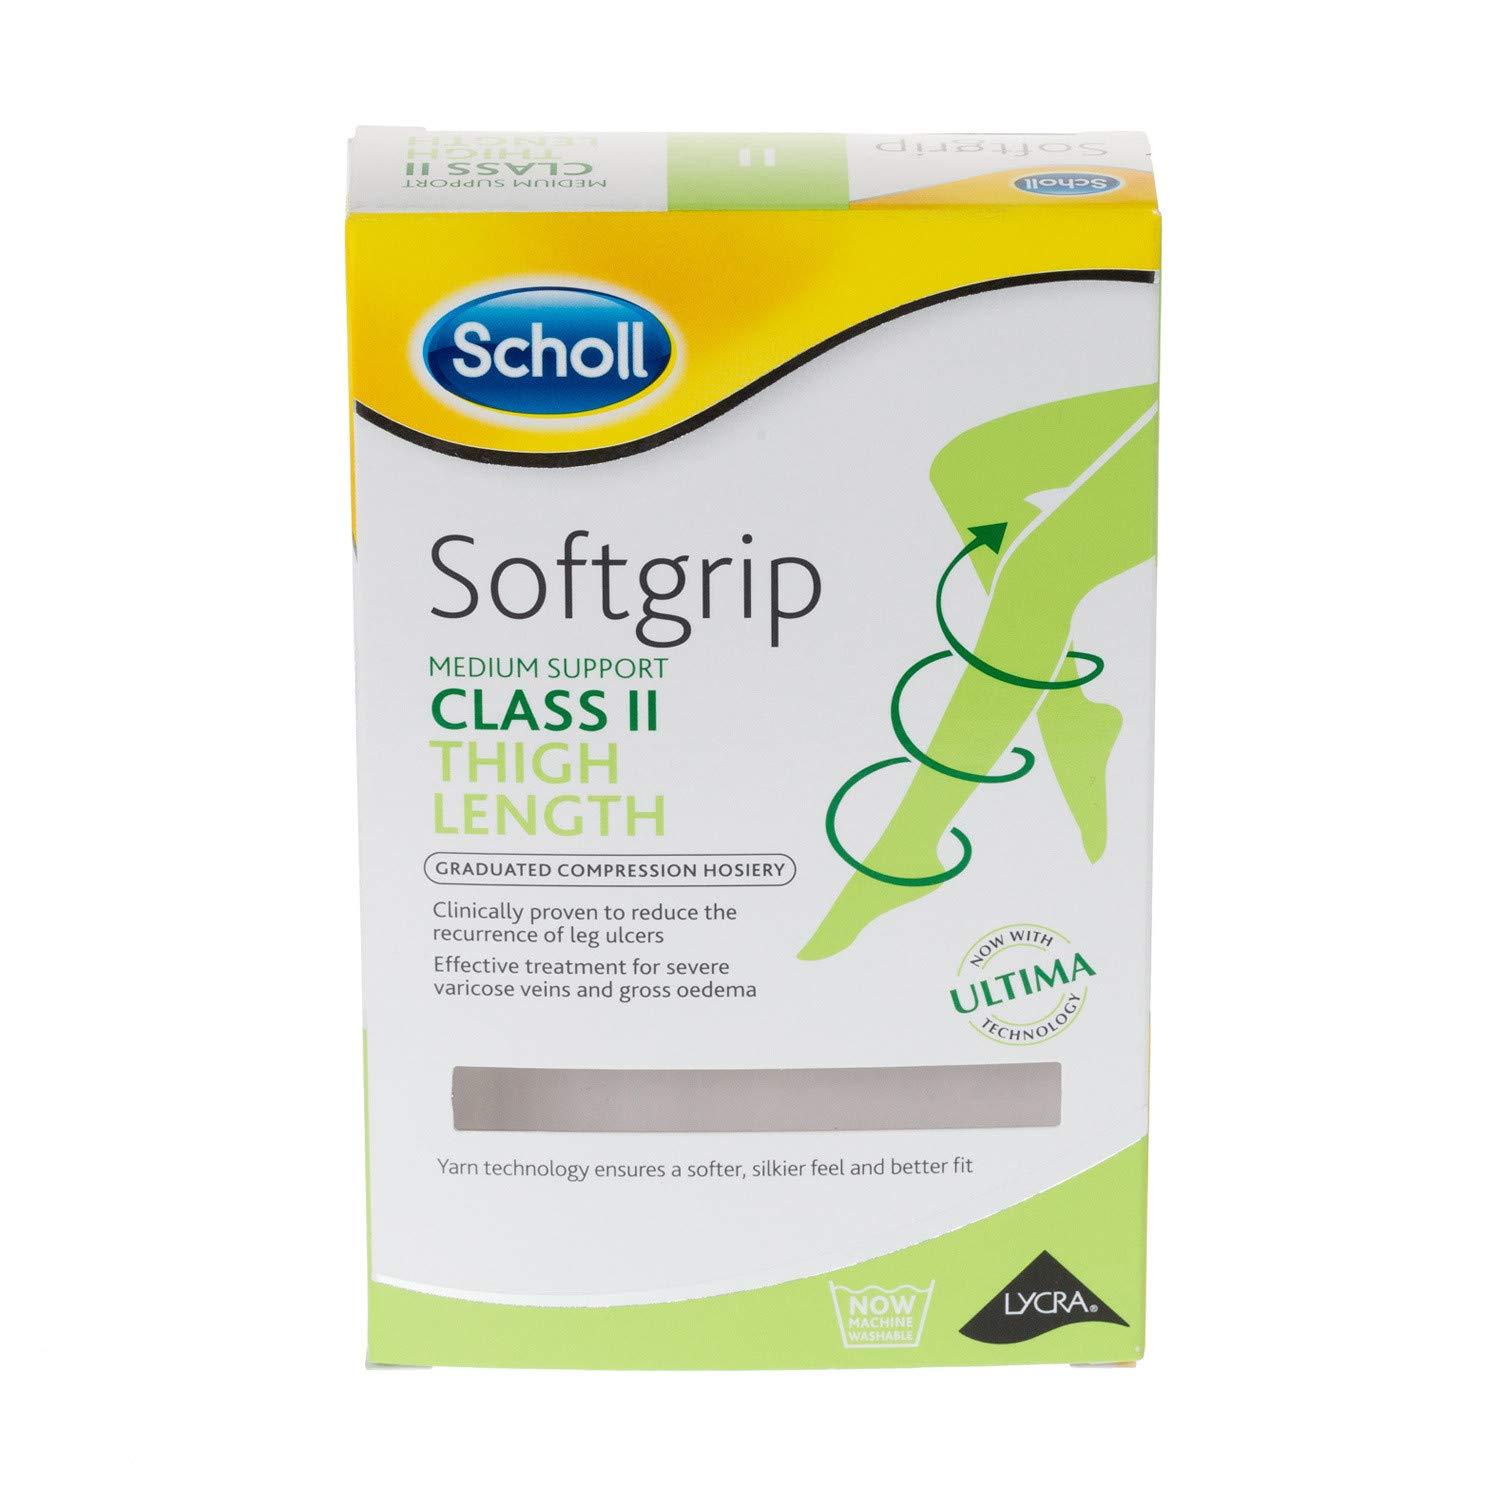 Scholl Softgrip Class II Women's Compression Stockings - Medium Natural  Thigh Length - Light Support for Improved Circulation Varicose Veins  Swelling Relief